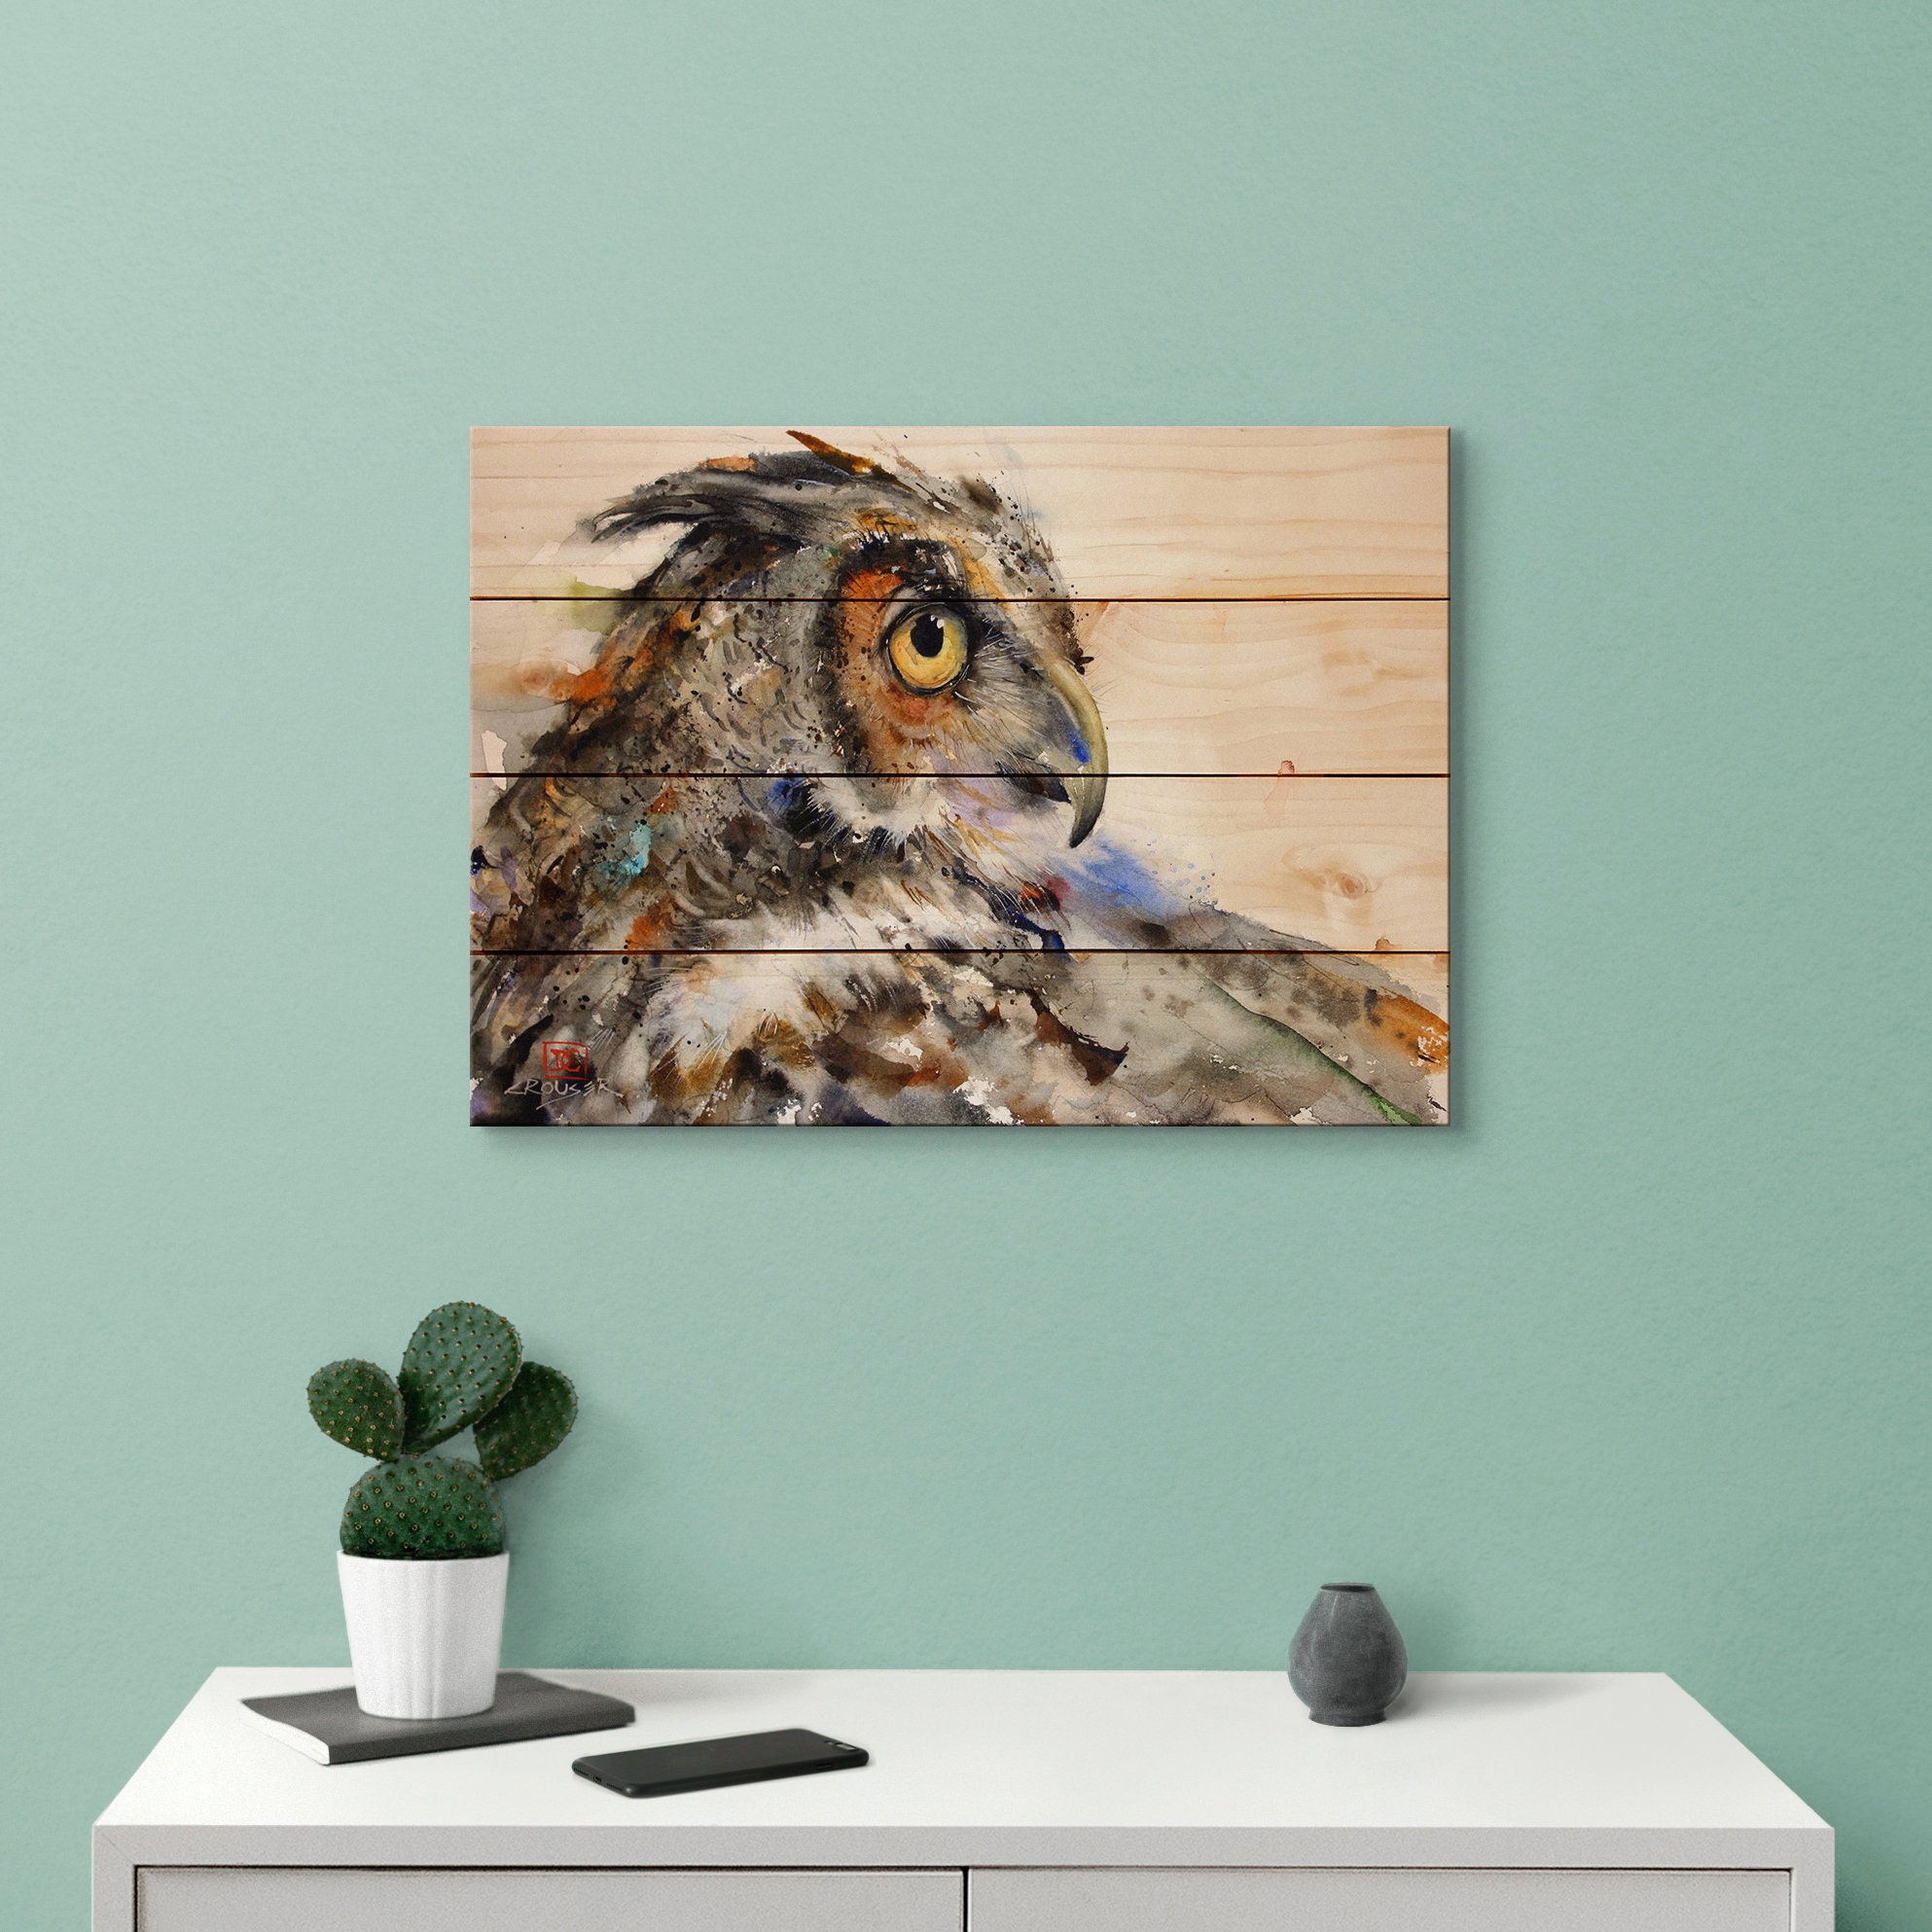 Looking Back. Colorful Owl Watercolor Print on Wood. Indoor | Etsy